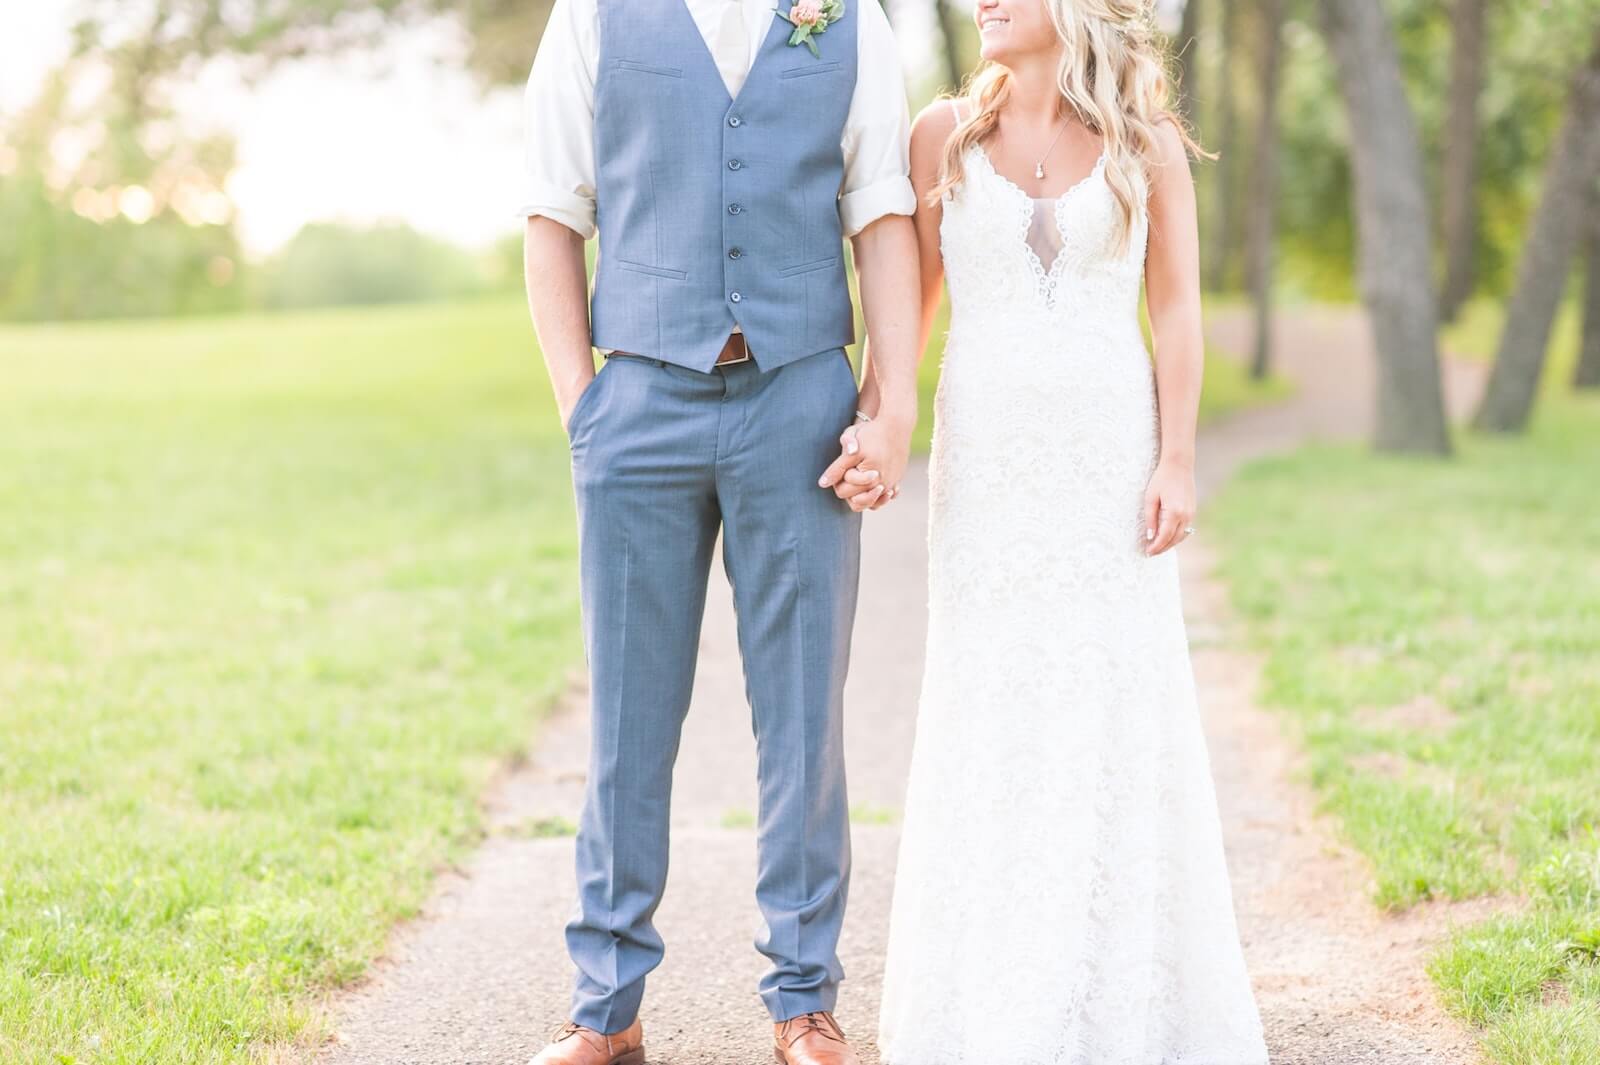 How to Match Your Groom’s Attire to Your Dress and Wedding Style